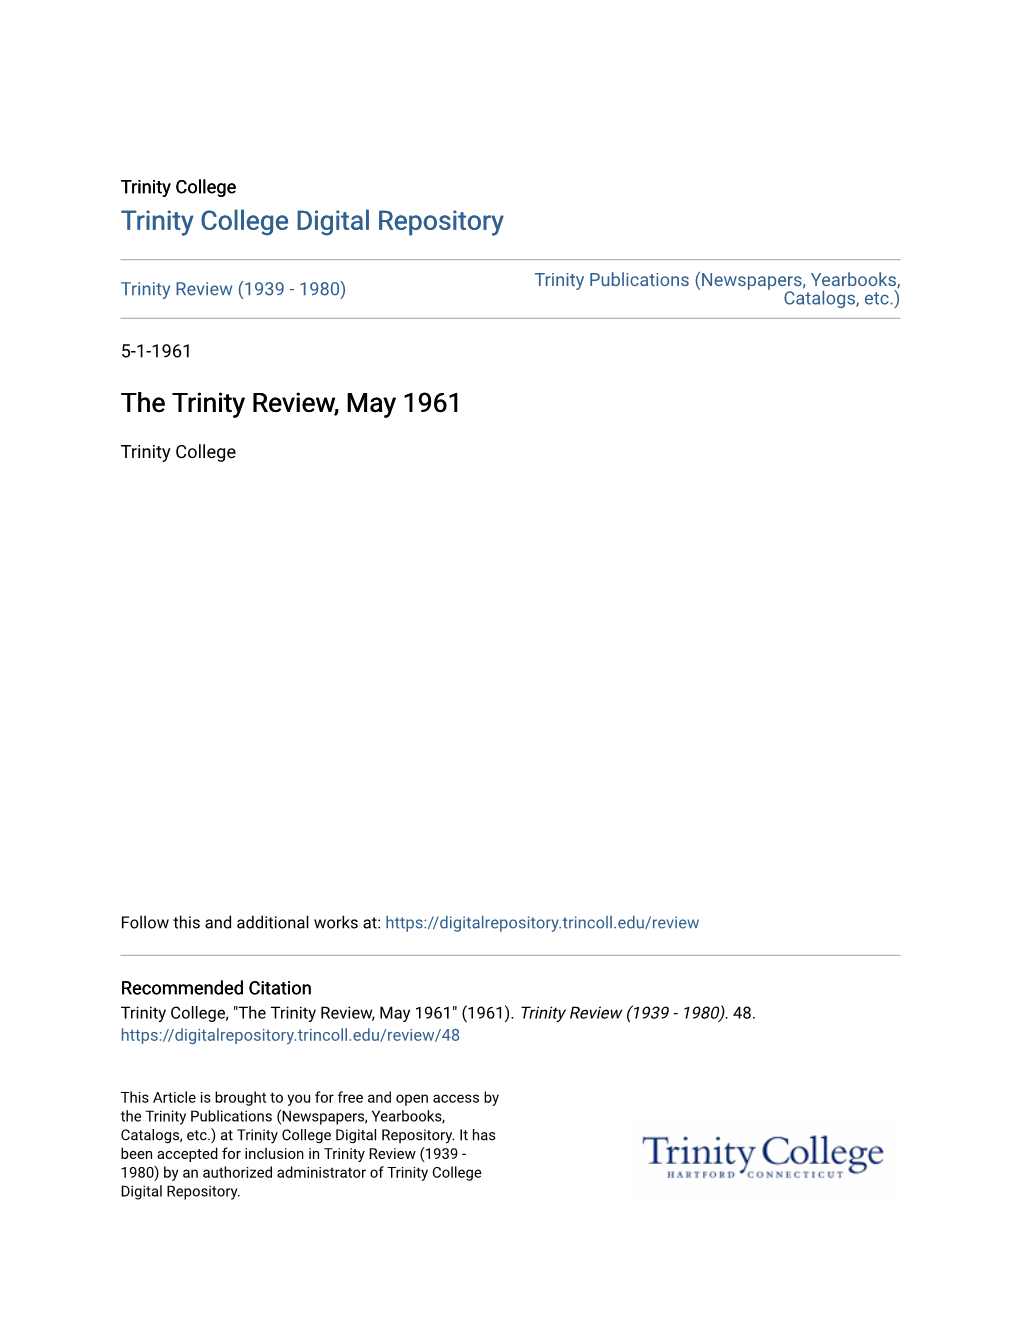 The Trinity Review, May 1961